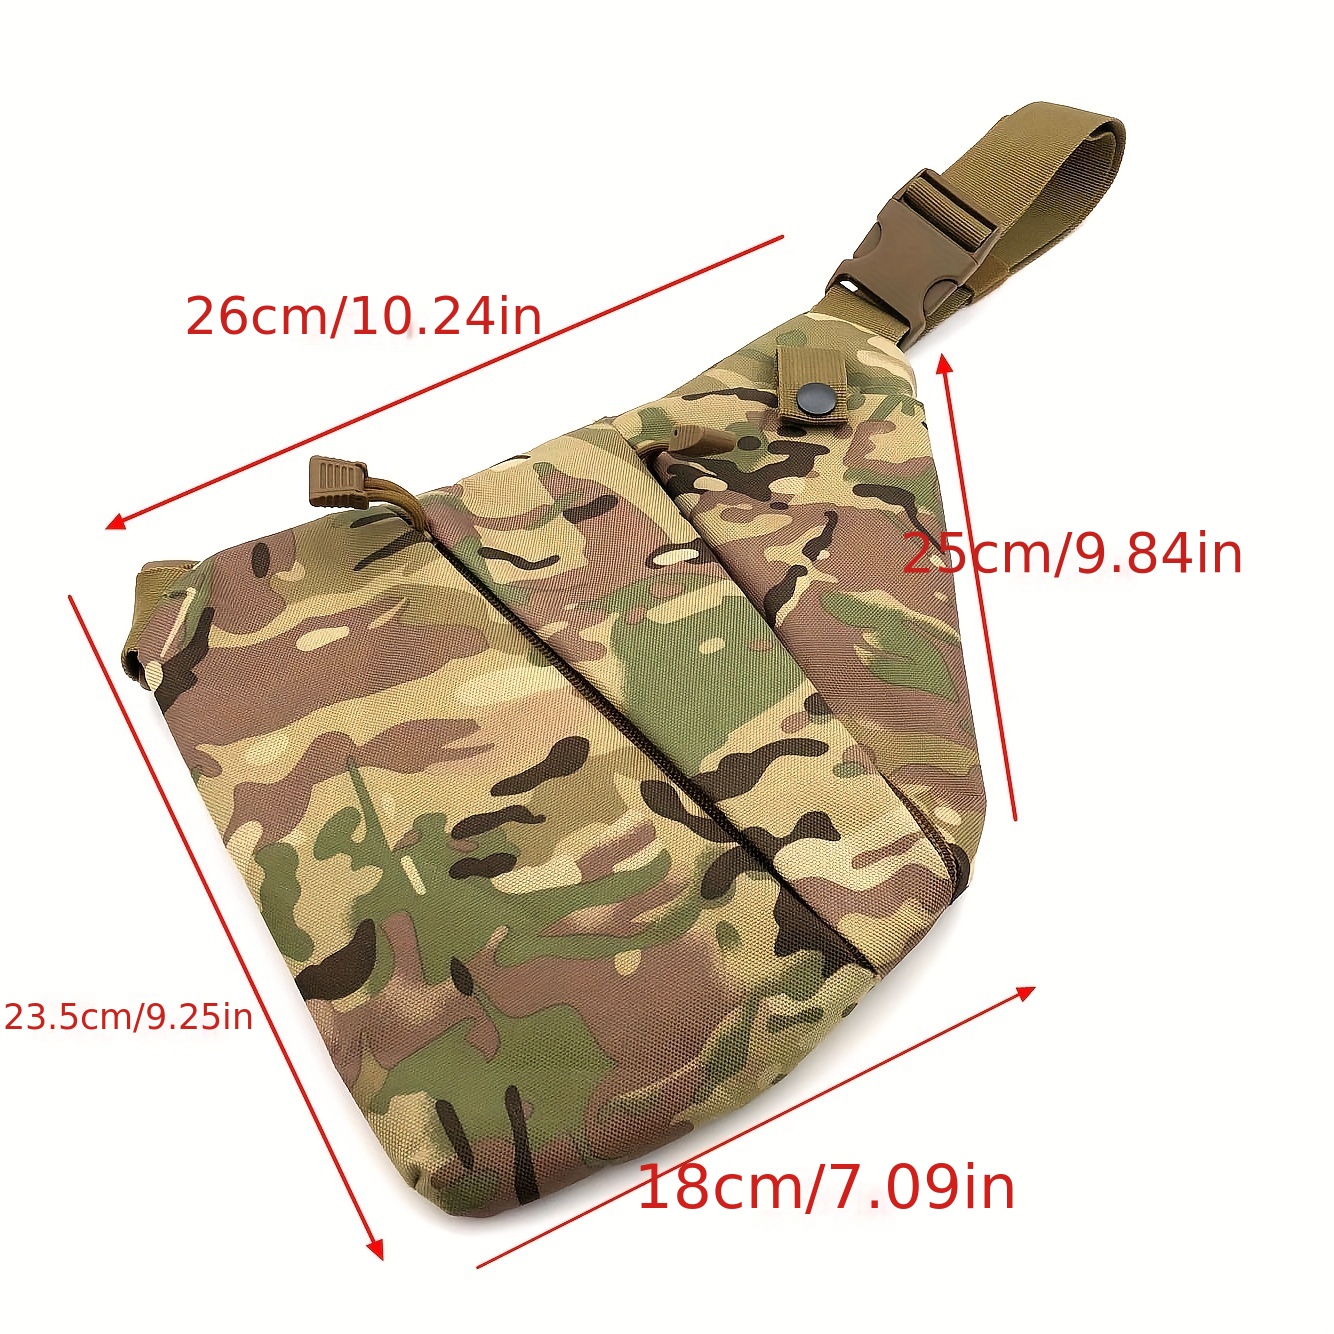 New Camouflage Sports Chest Bag, Multifunctional Outdoor Messenger Bag,  Men's Versatile Shoulder Bag Fanny Pack Crossbody Bag Sling Bag For Travel  Work Holiday Essentials Lightweight Anti Theft Going Out Waterproof  Christmas Gift